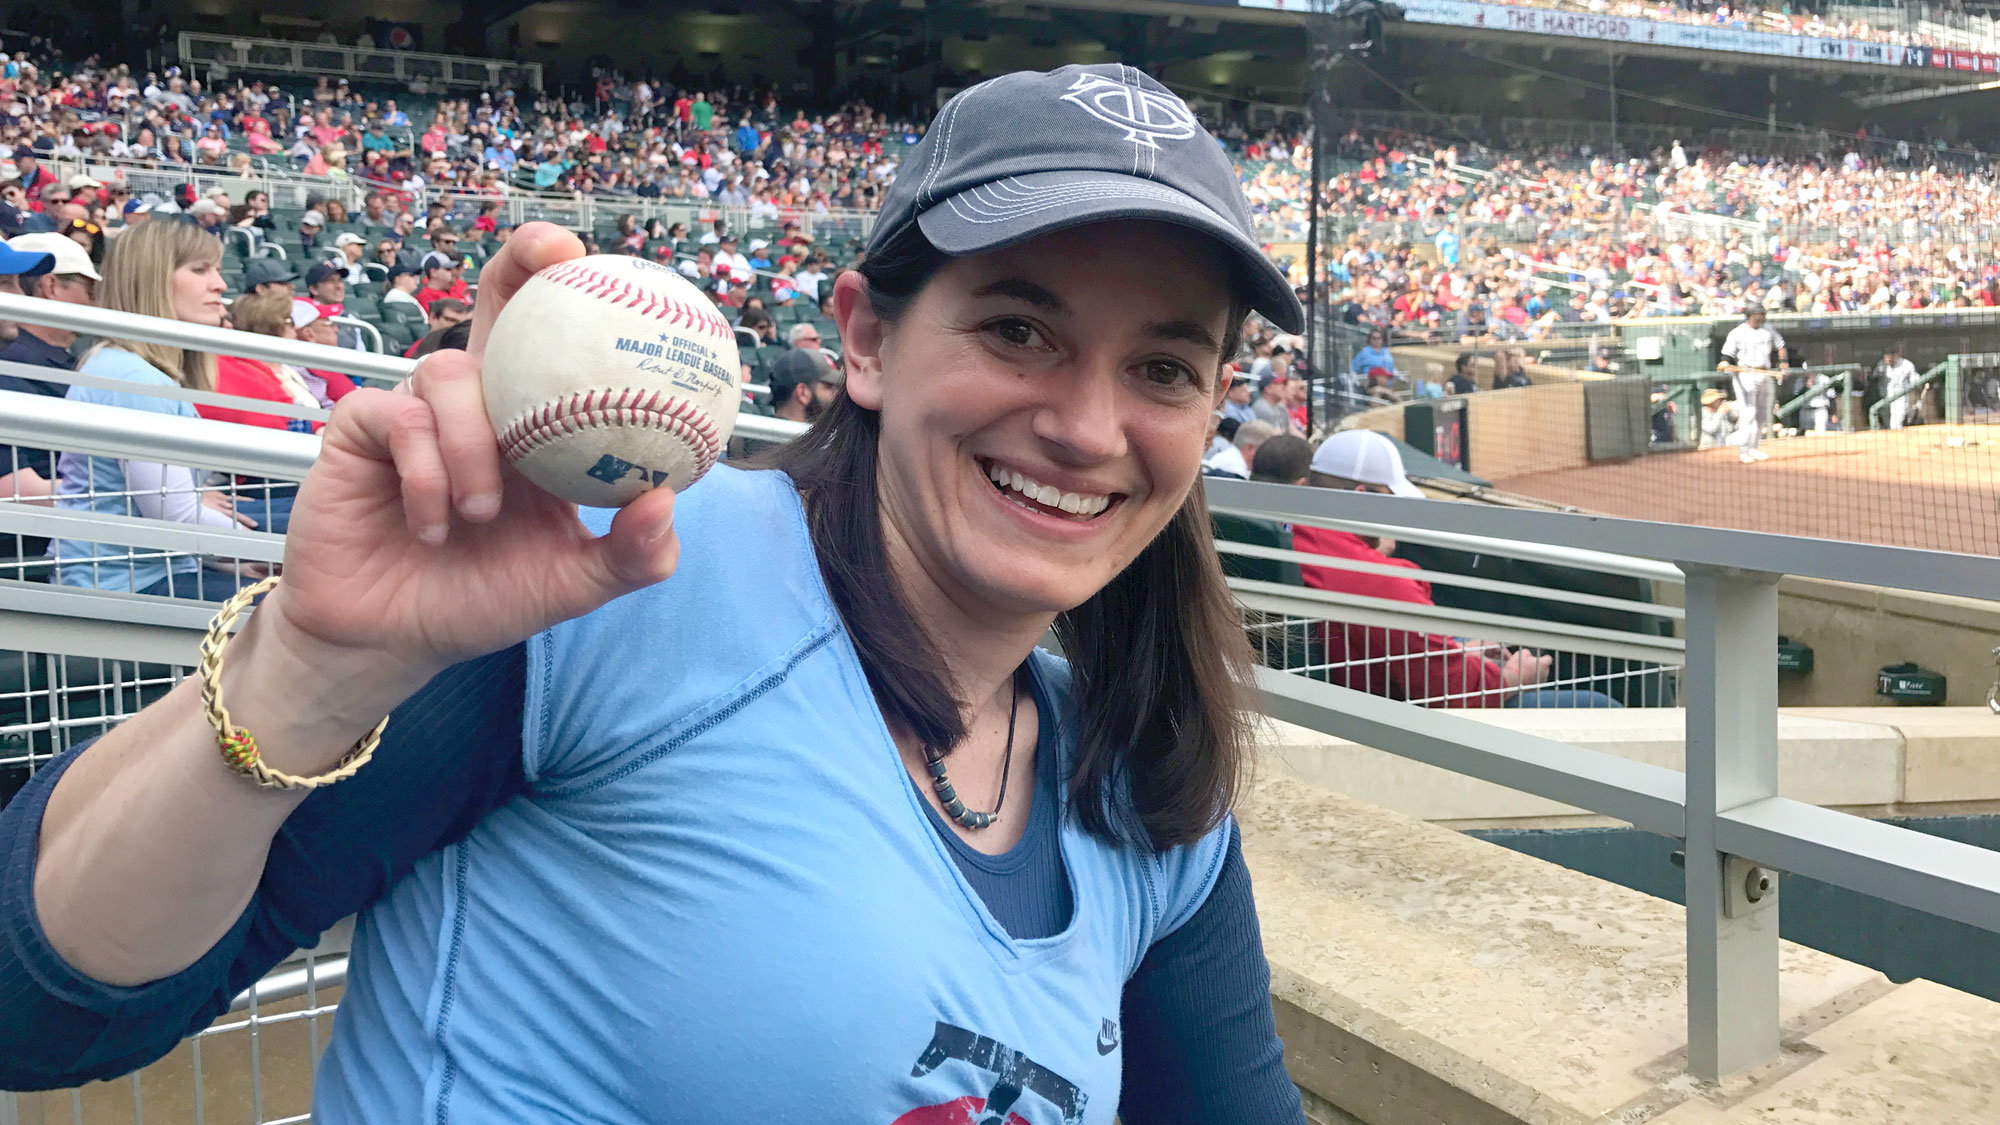 Larissa Minicucci holds up a baseball at a Twins game